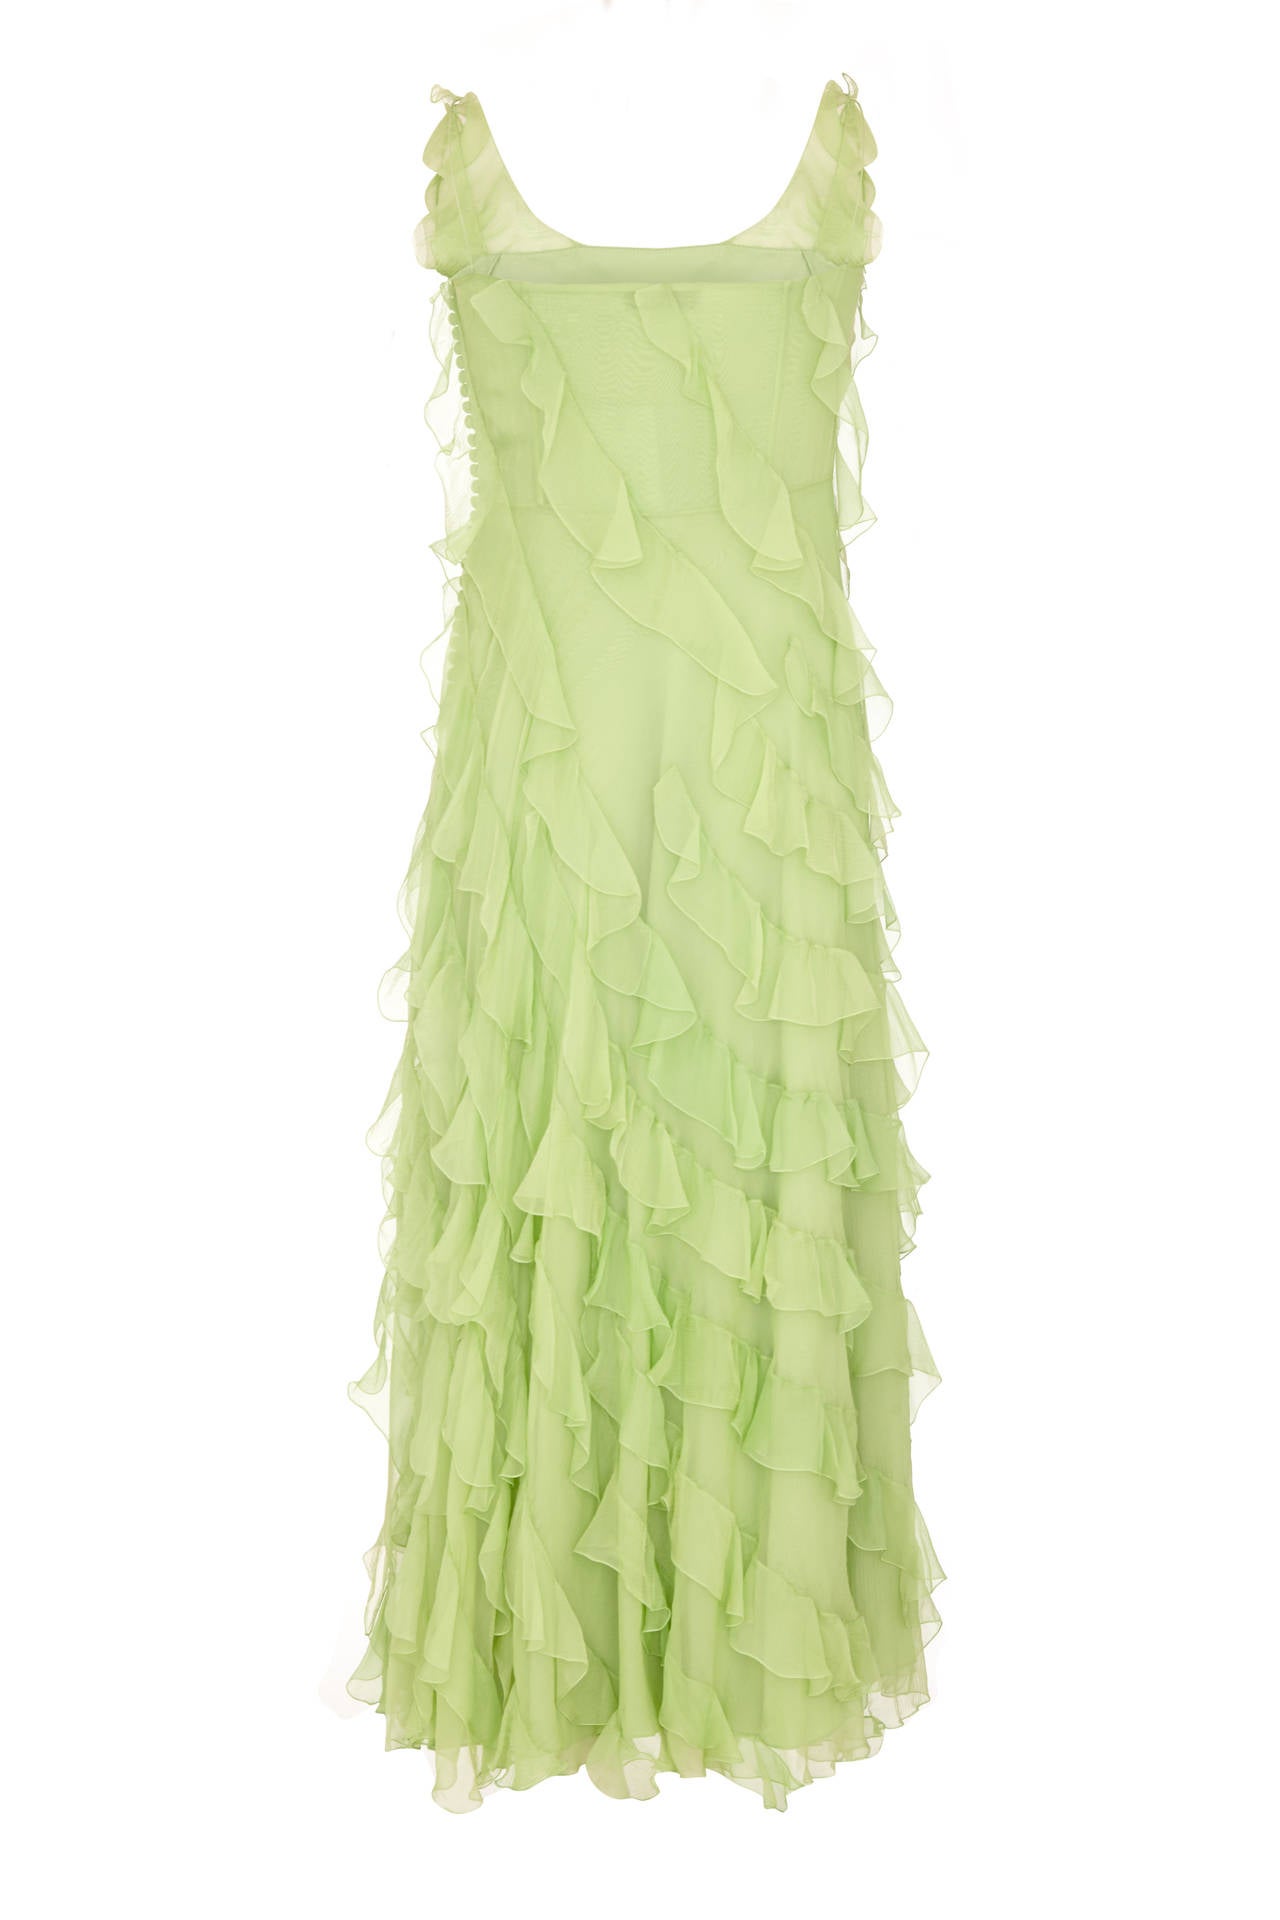 Stunning late 90s pale lime green chiffon bias cut gown by John Galliano for Christian Dior.  This beautiful dress features thin spaghetti straps and diagonal chiffon ruffles throughout. It is labelled UK size 12/ US size 8 but is more like a UK 10/